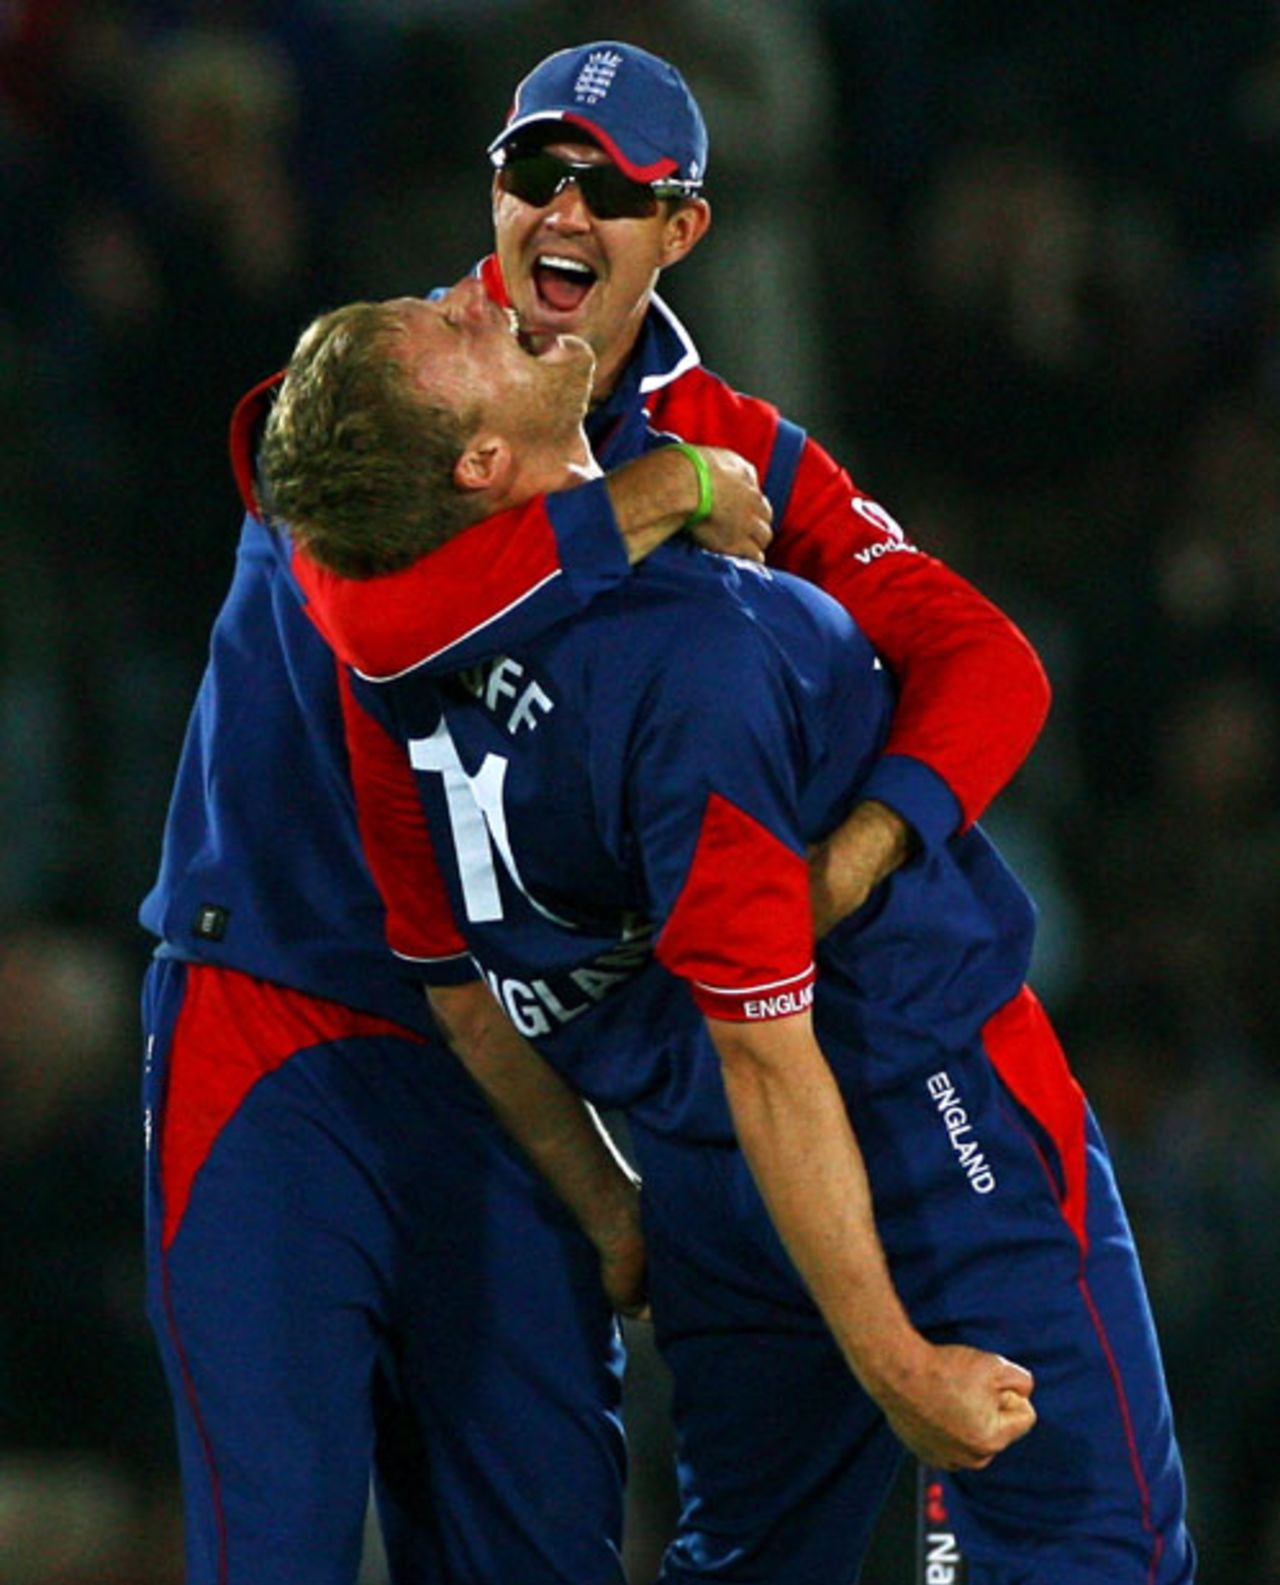 Andrew Flintoff celebrates the wicket of Mahendra Singh Dhoni with Kevin Pietersen, England v India, 1st ODI, Southampton, August 21, 2007